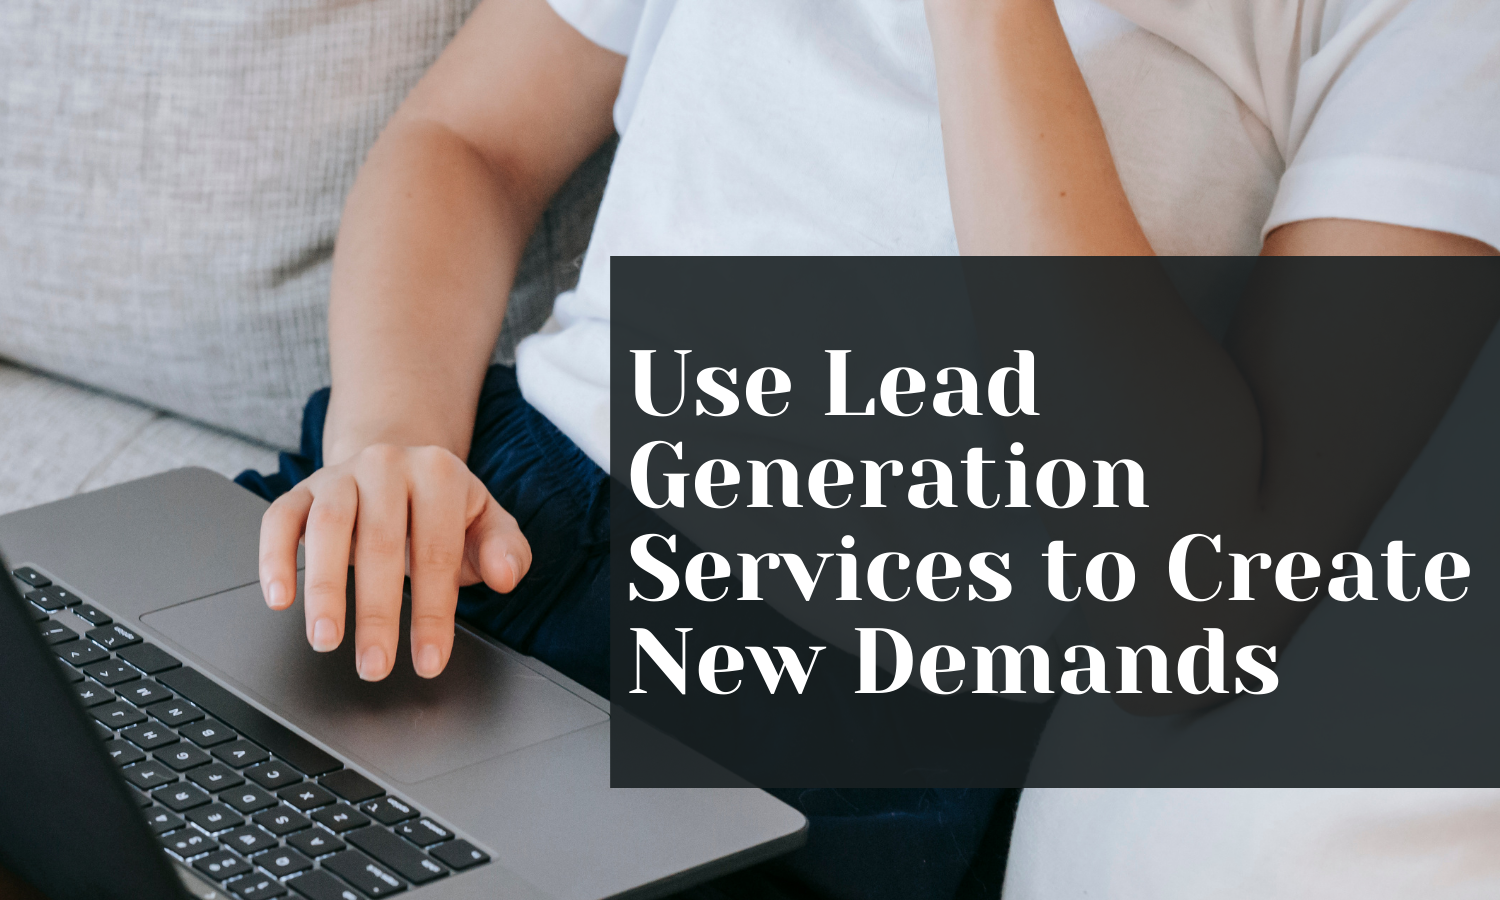 How to Use Lead Generation Services to Create New Demands